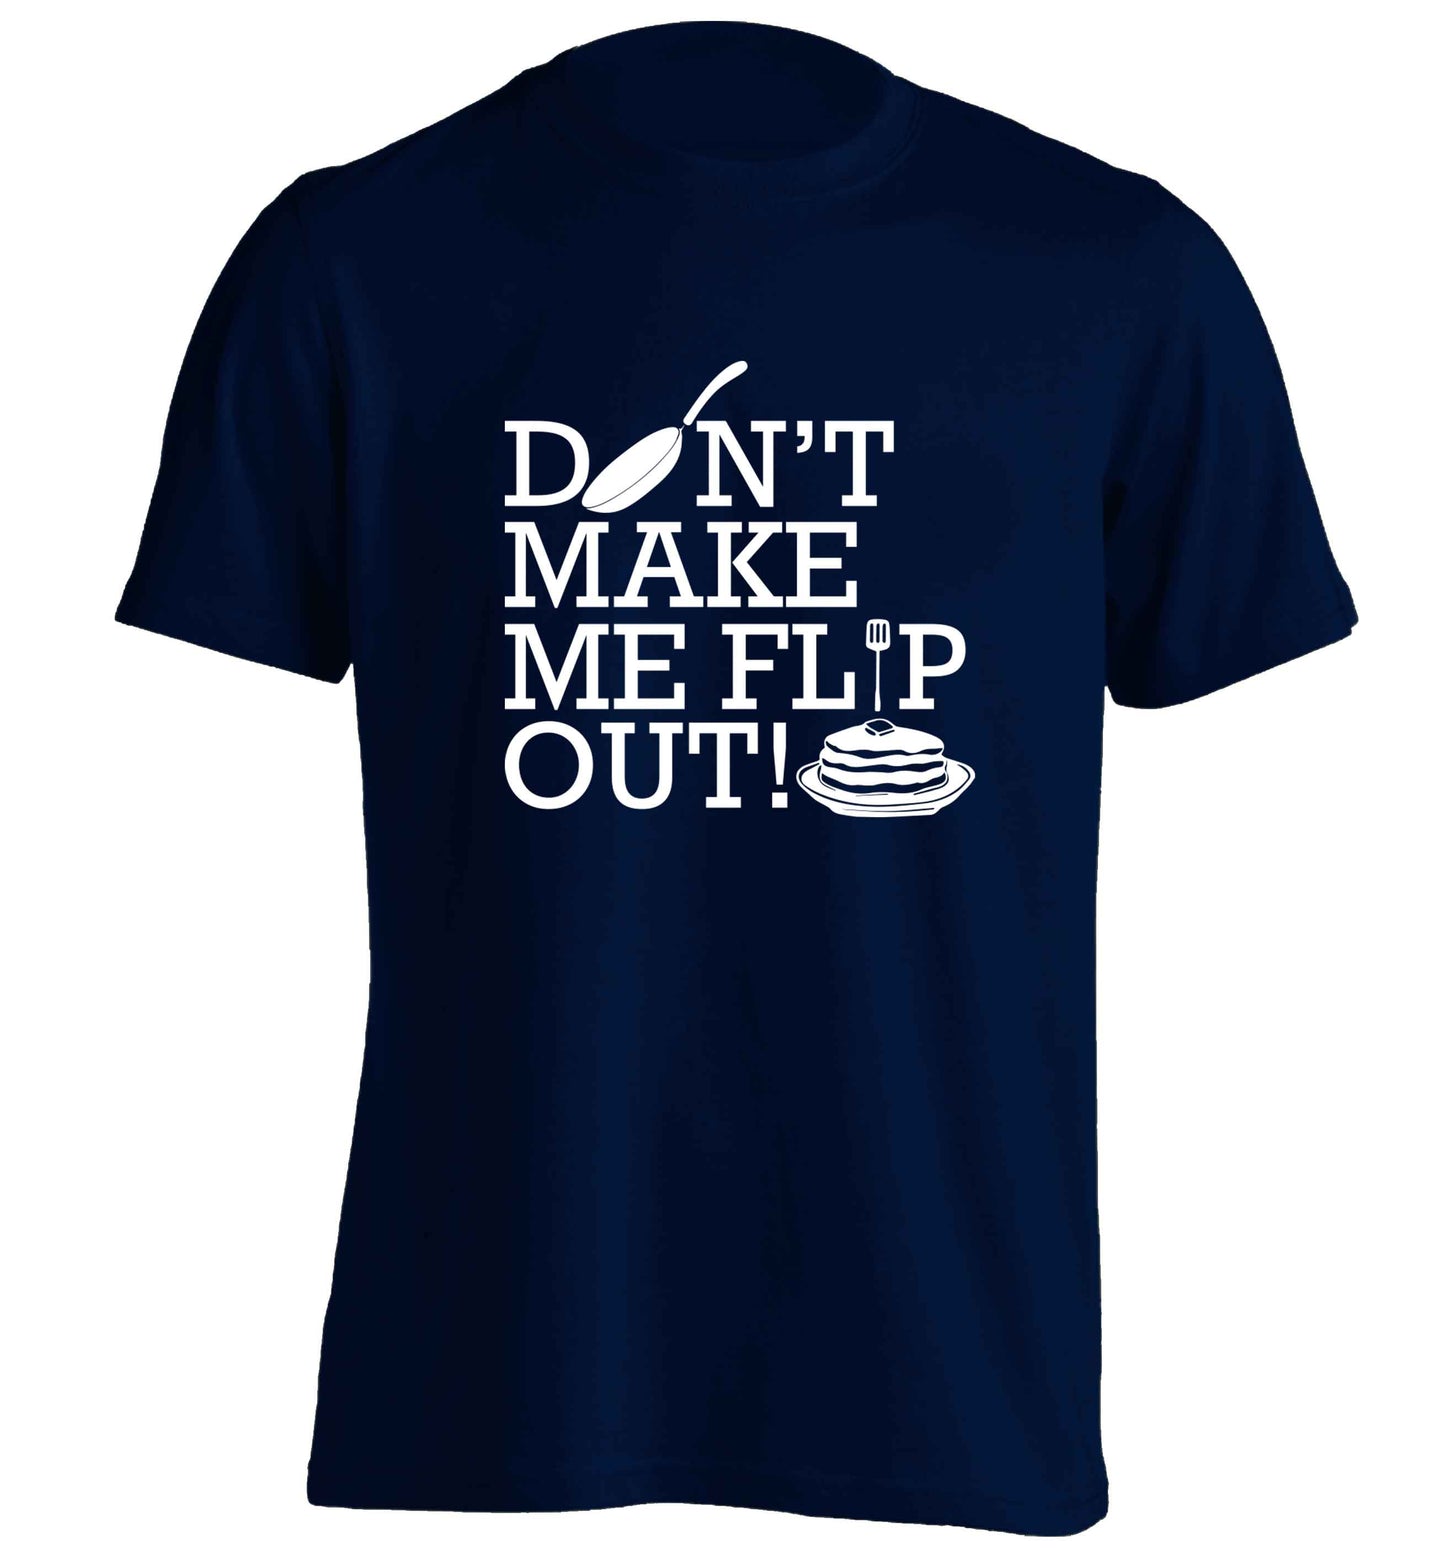 Don't make me flip out adults unisex navy Tshirt 2XL